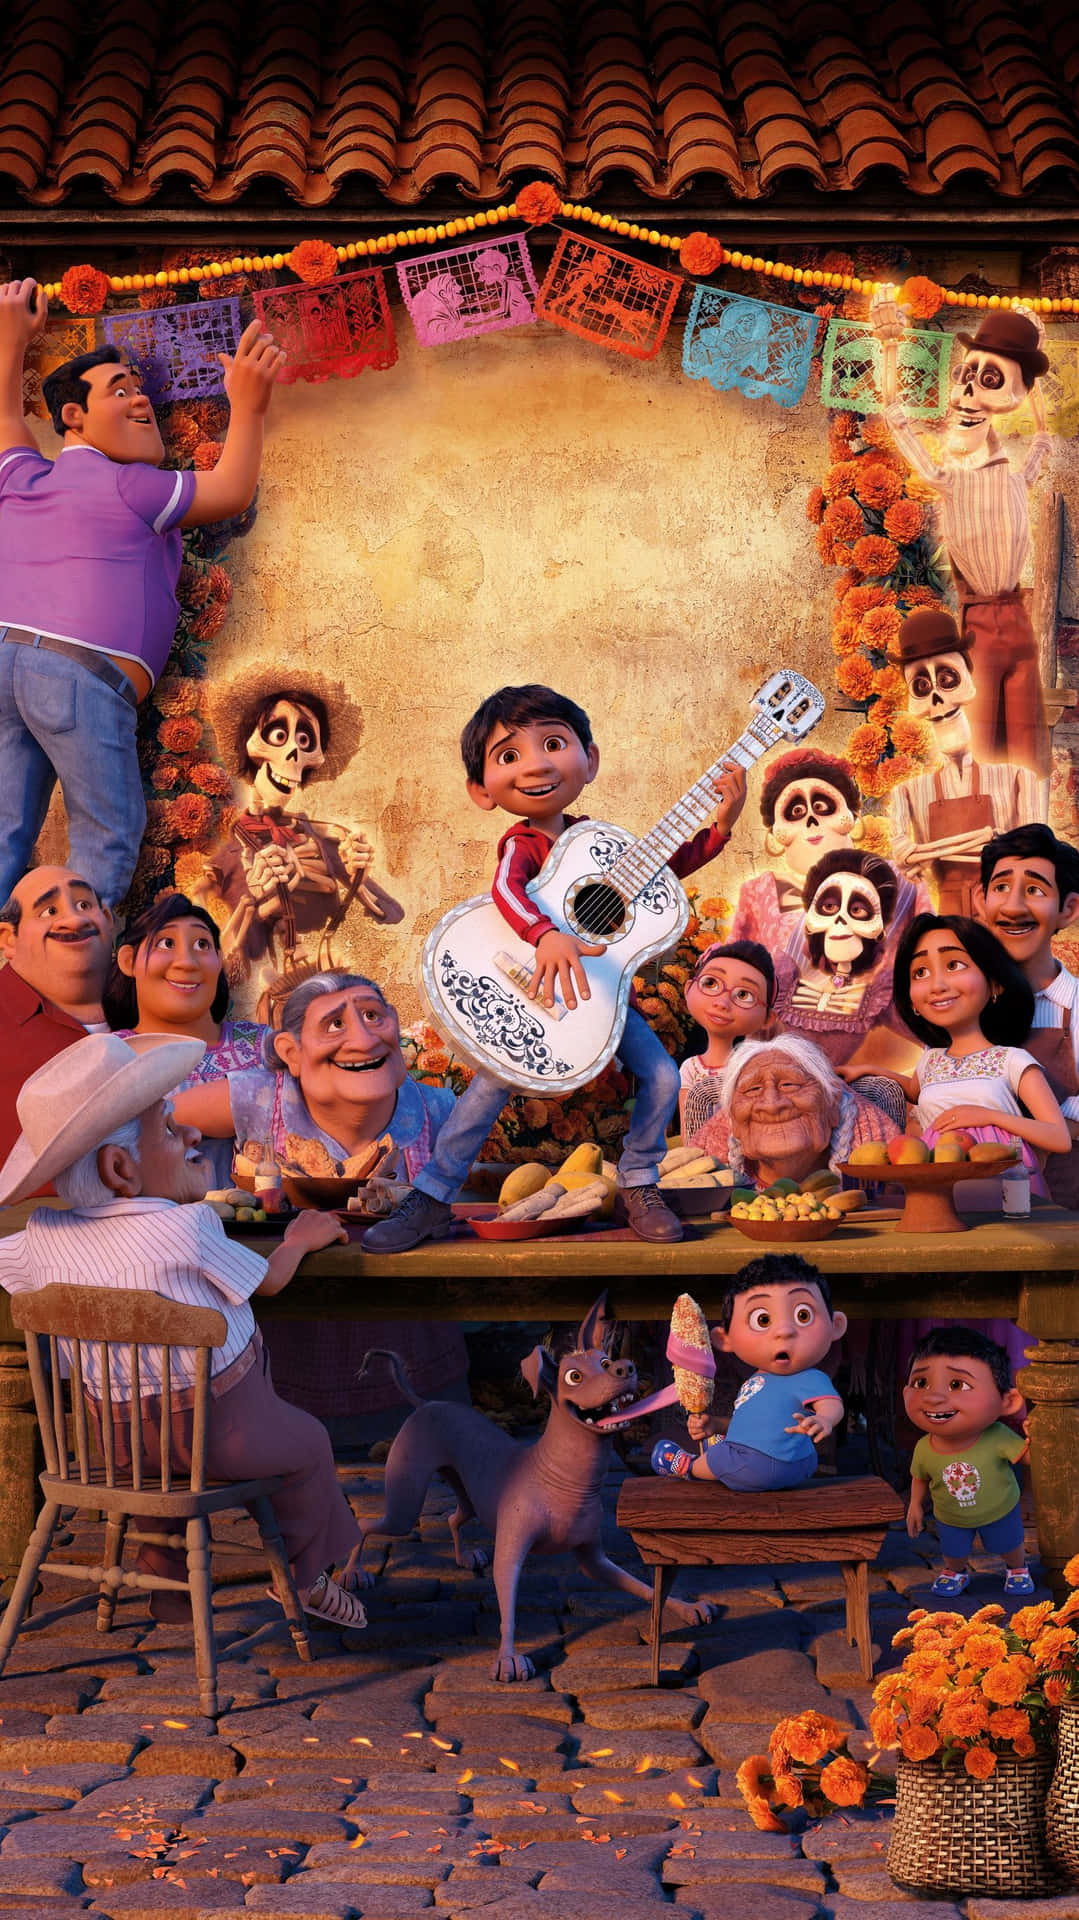 Come and join us on an adventure with Miguel and his family in the joyous celebration of the Day of the Dead. Wallpaper